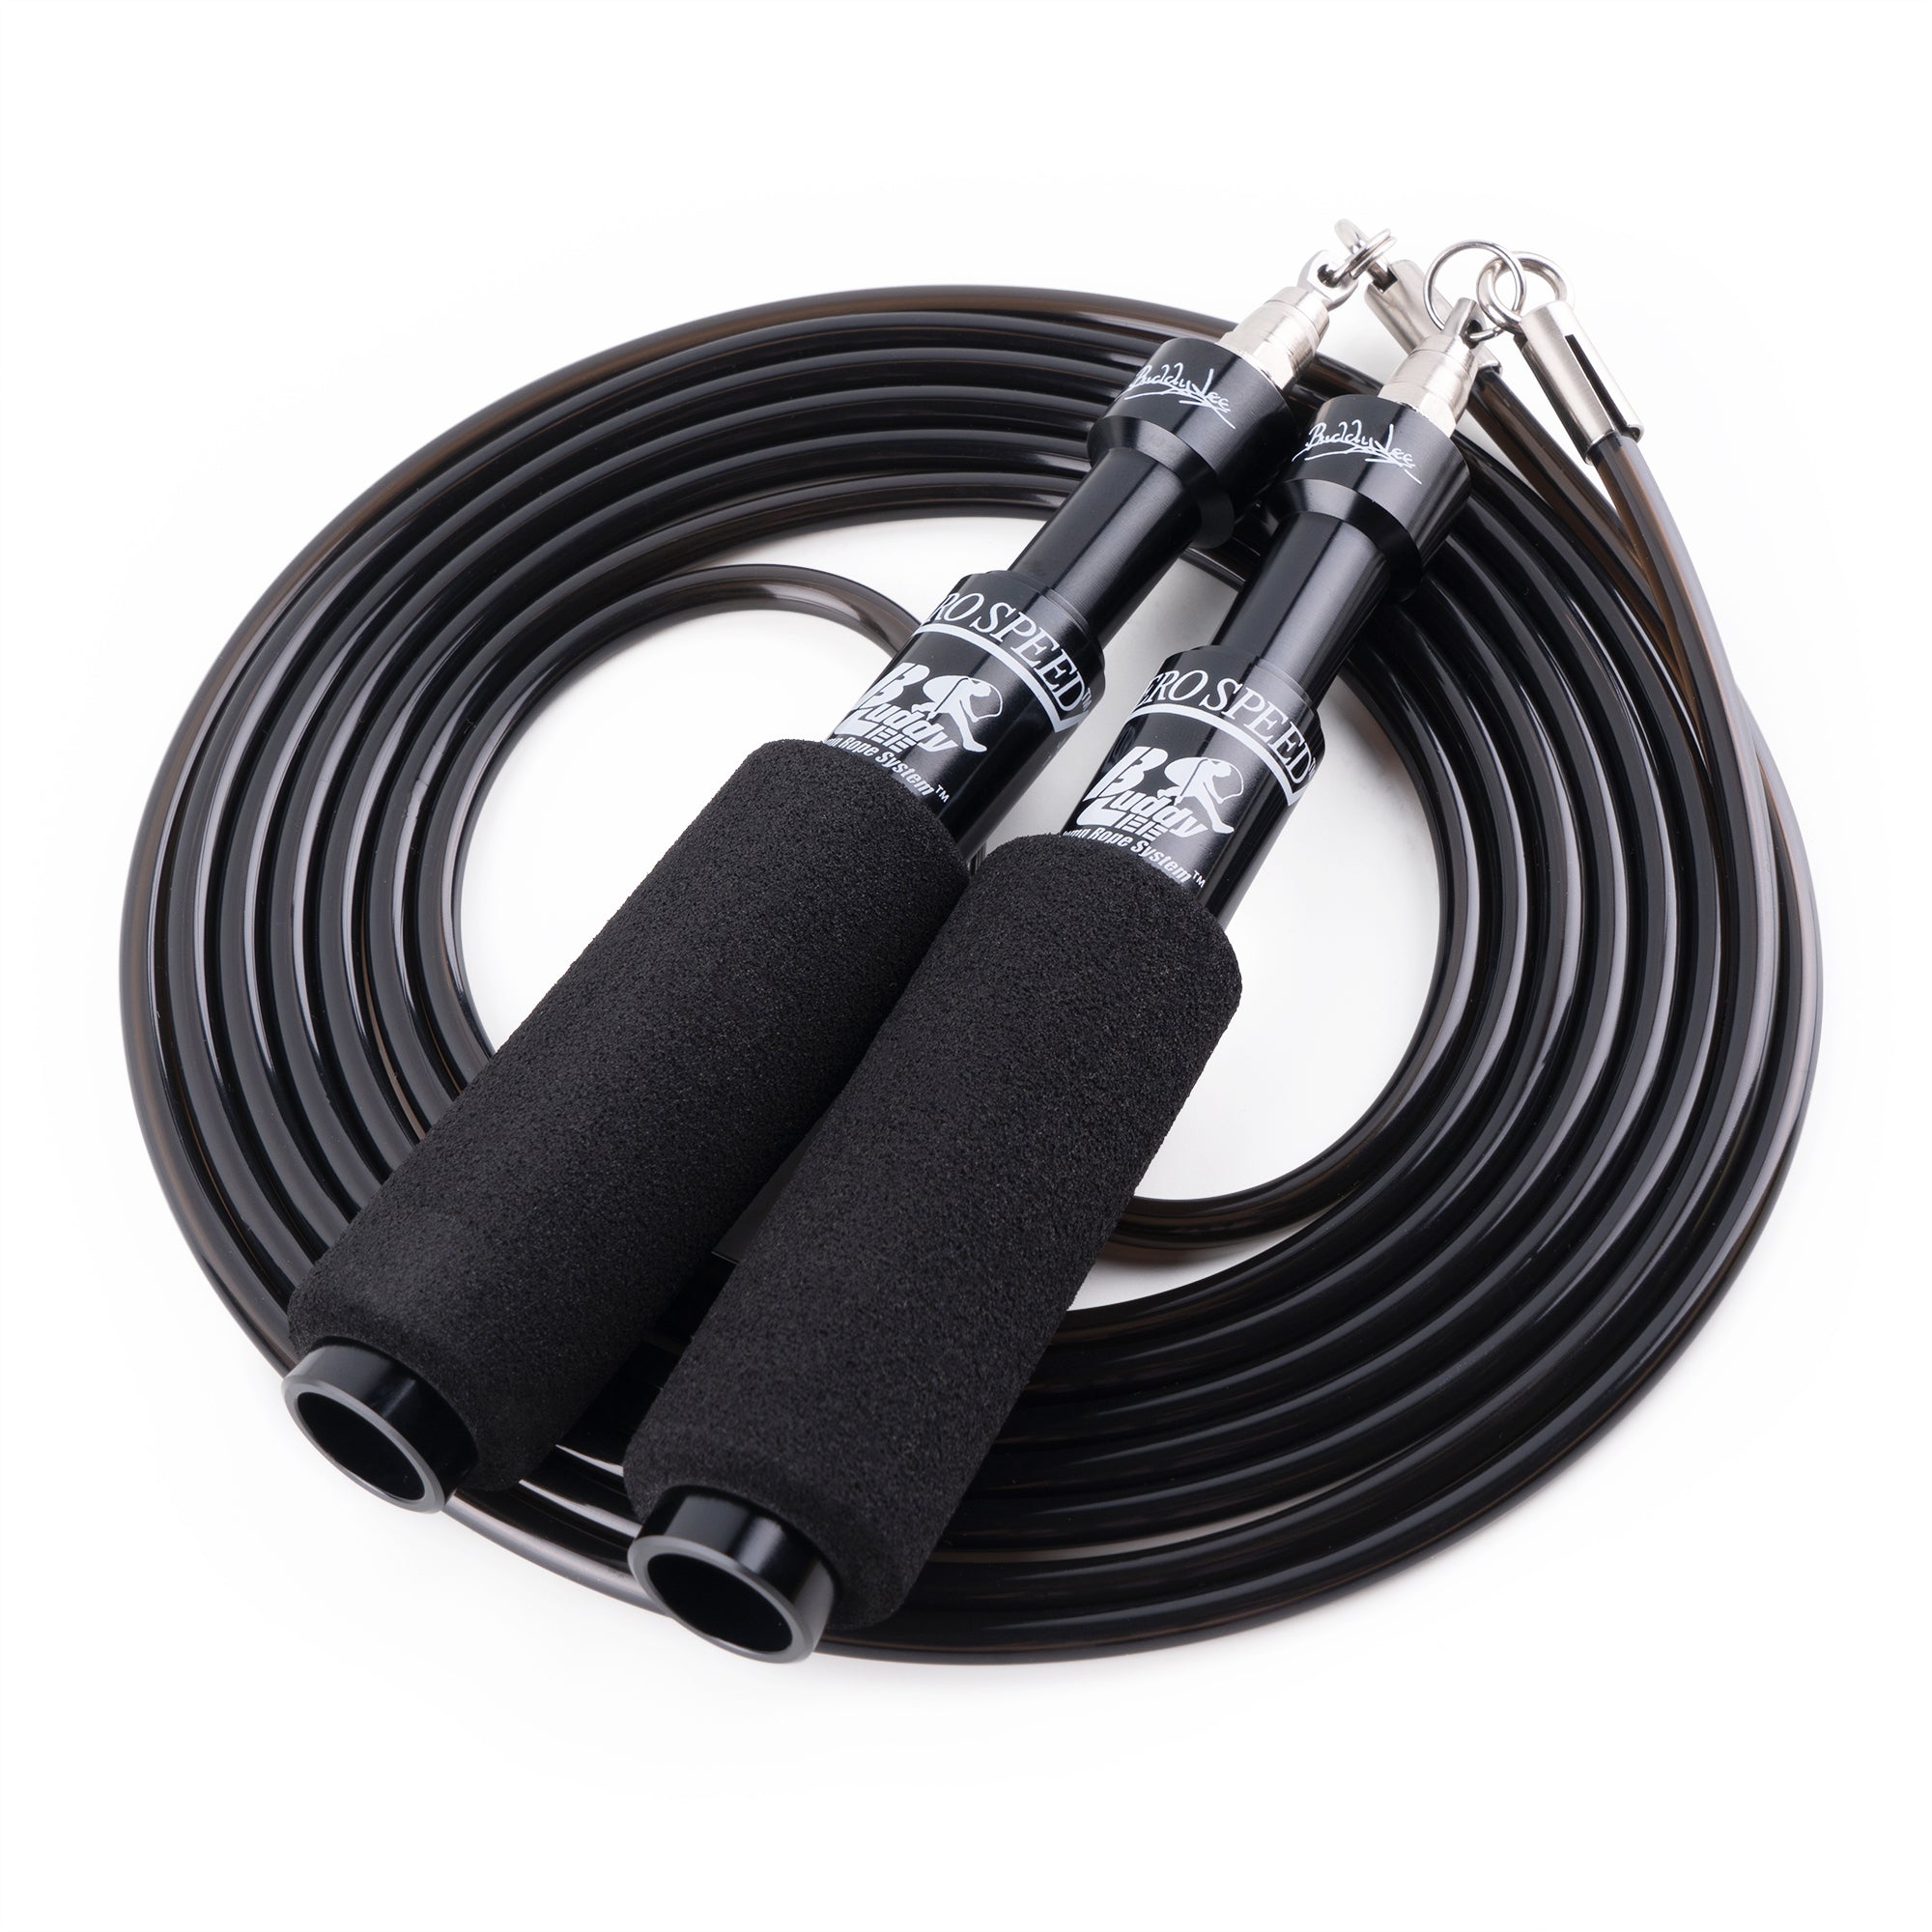 New Aero Speed Jump Rope - New Technology, Features, & Custom Colors Selection.